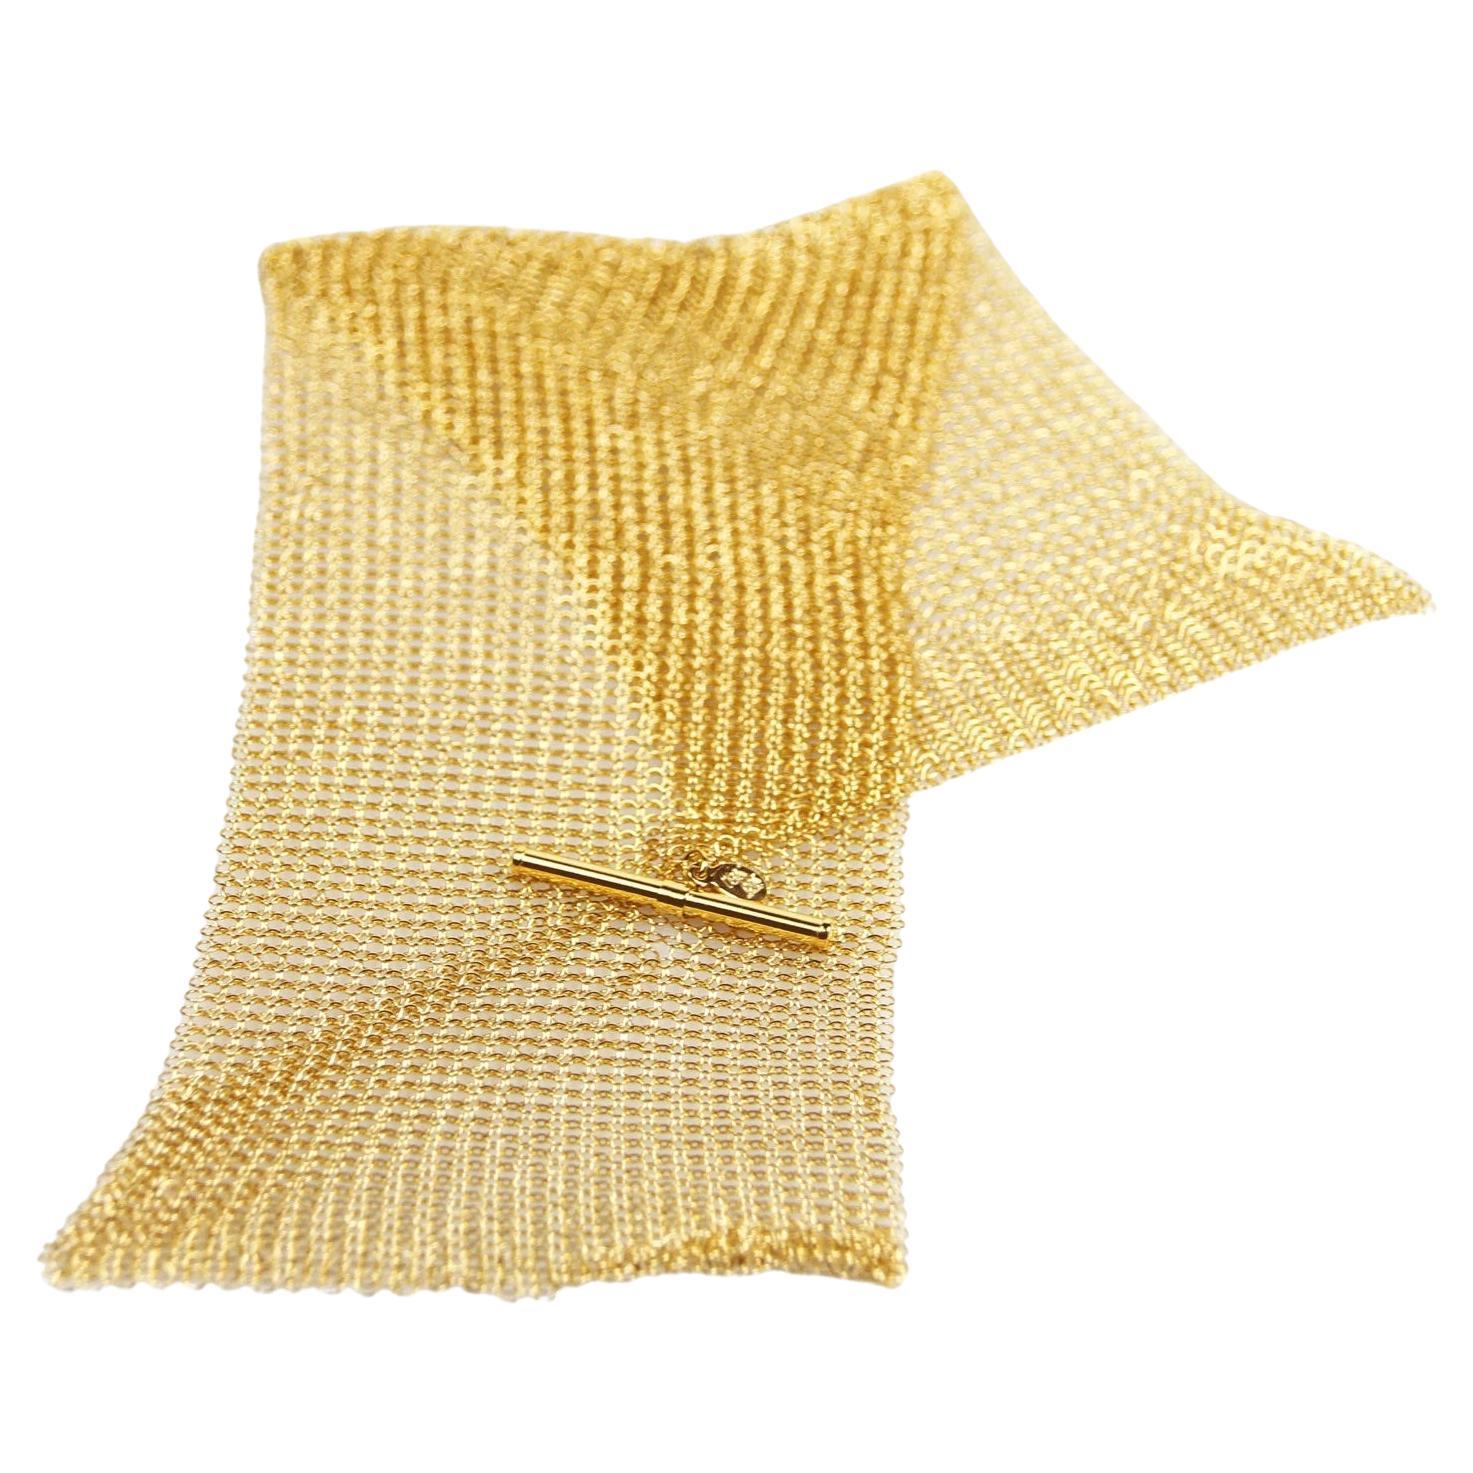 Interval Bracelet Fine Delicate Sculptural Mesh, Contemporary Moving & Malleable For Sale